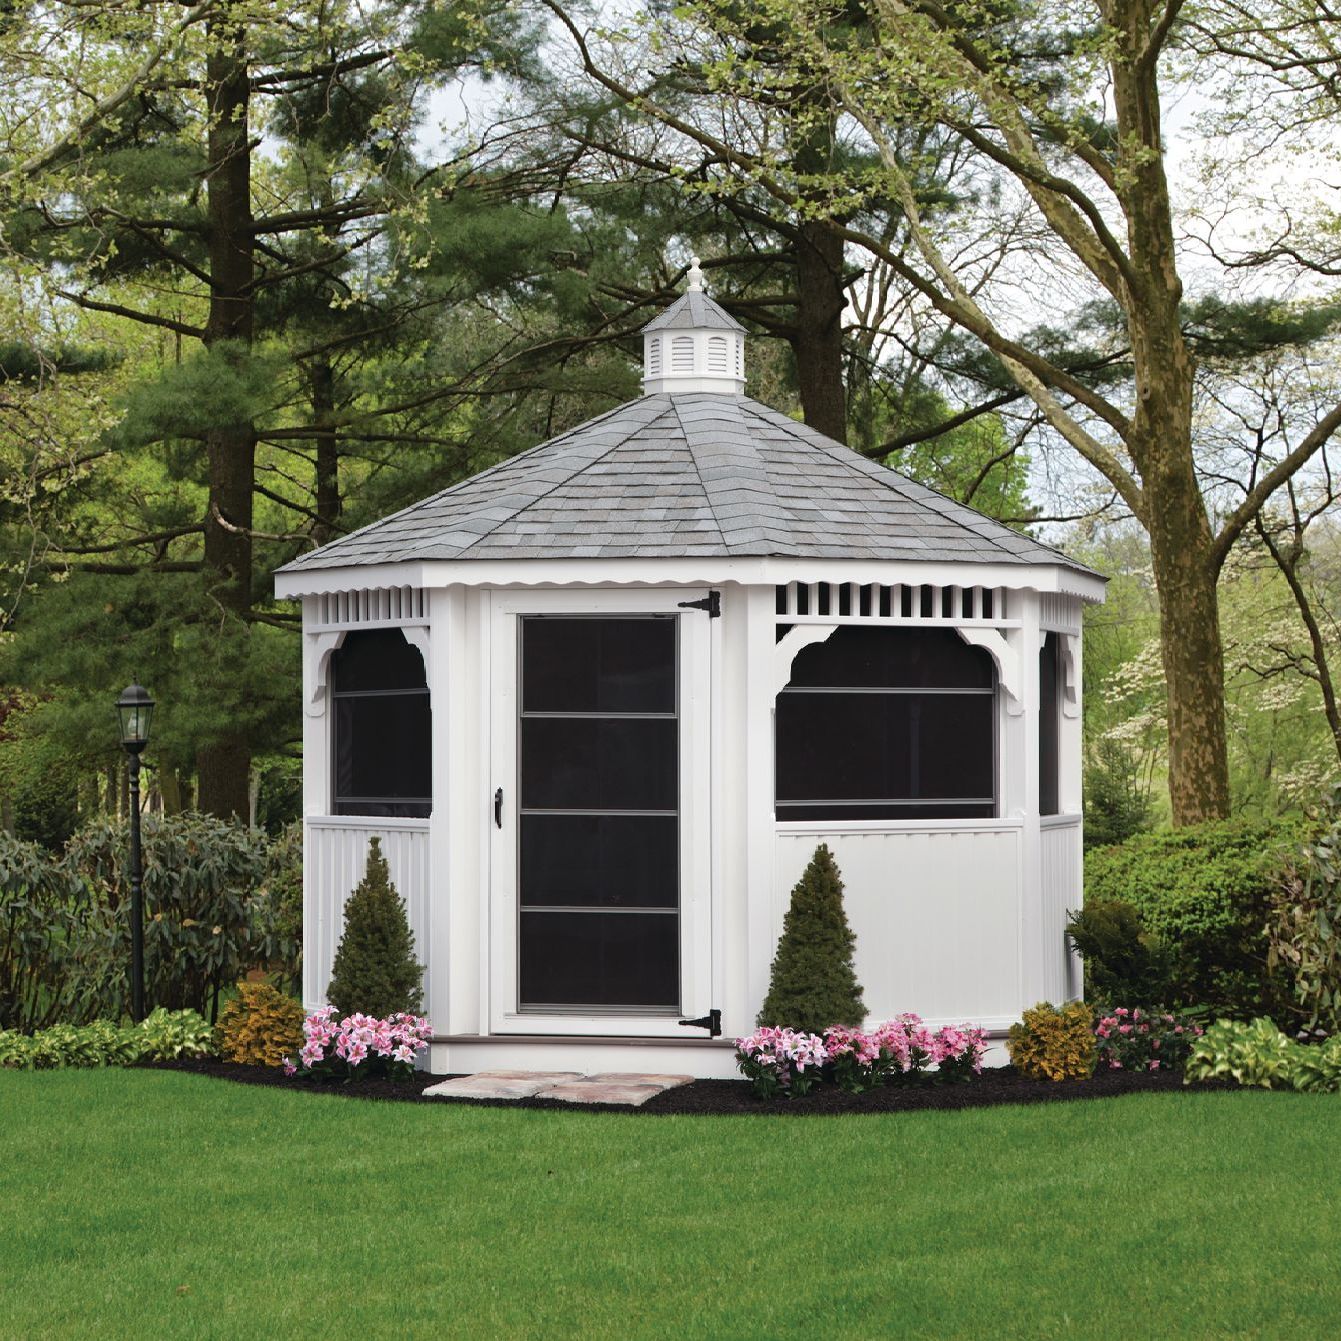 a white gazebo with a screened in door sits in the middle of a lush green yard